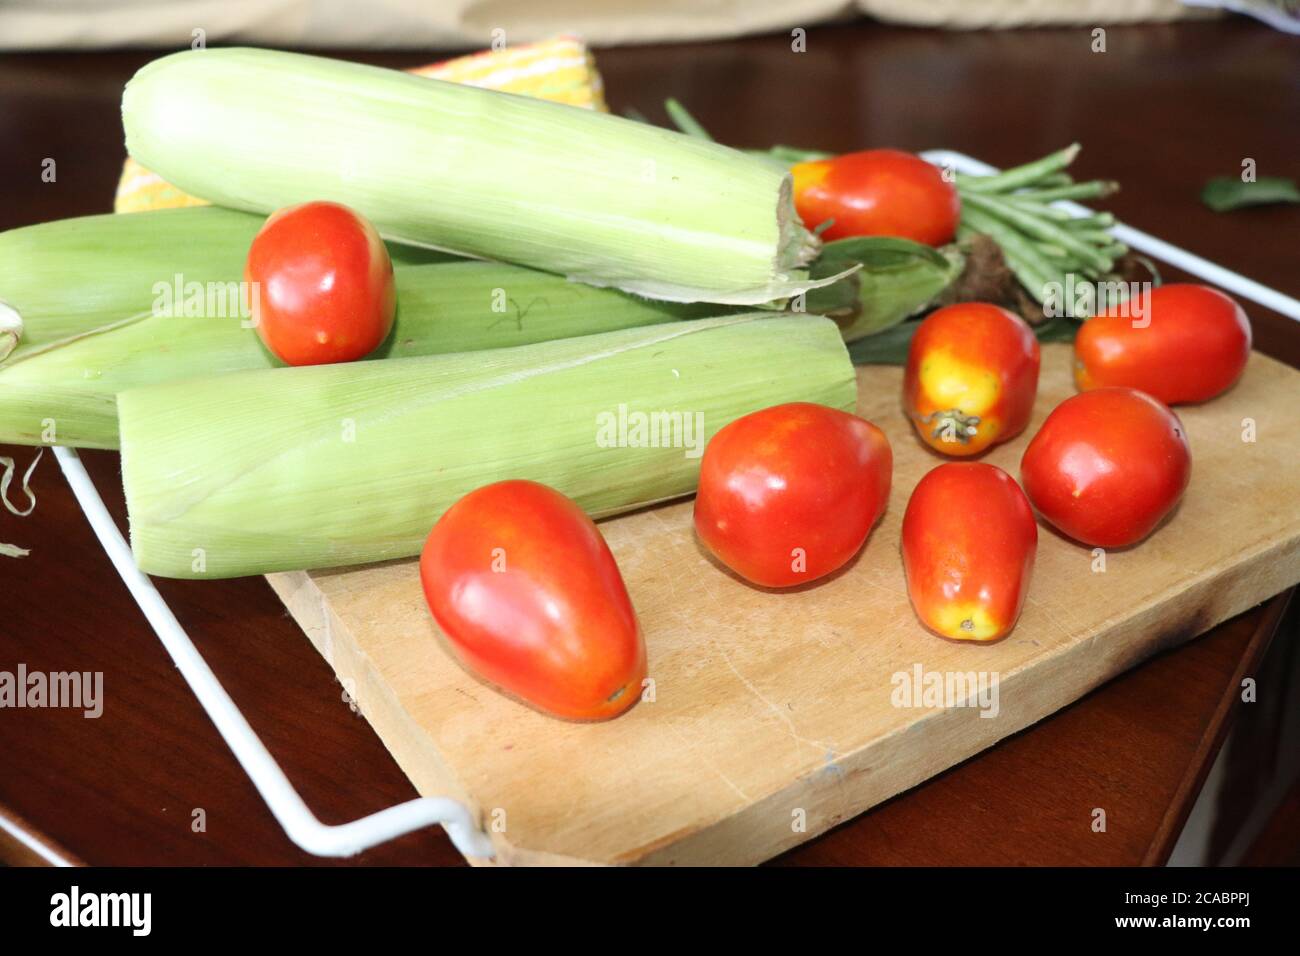 Fresh picked vegetables, tomatoes, corn, grean beans Stock Photo